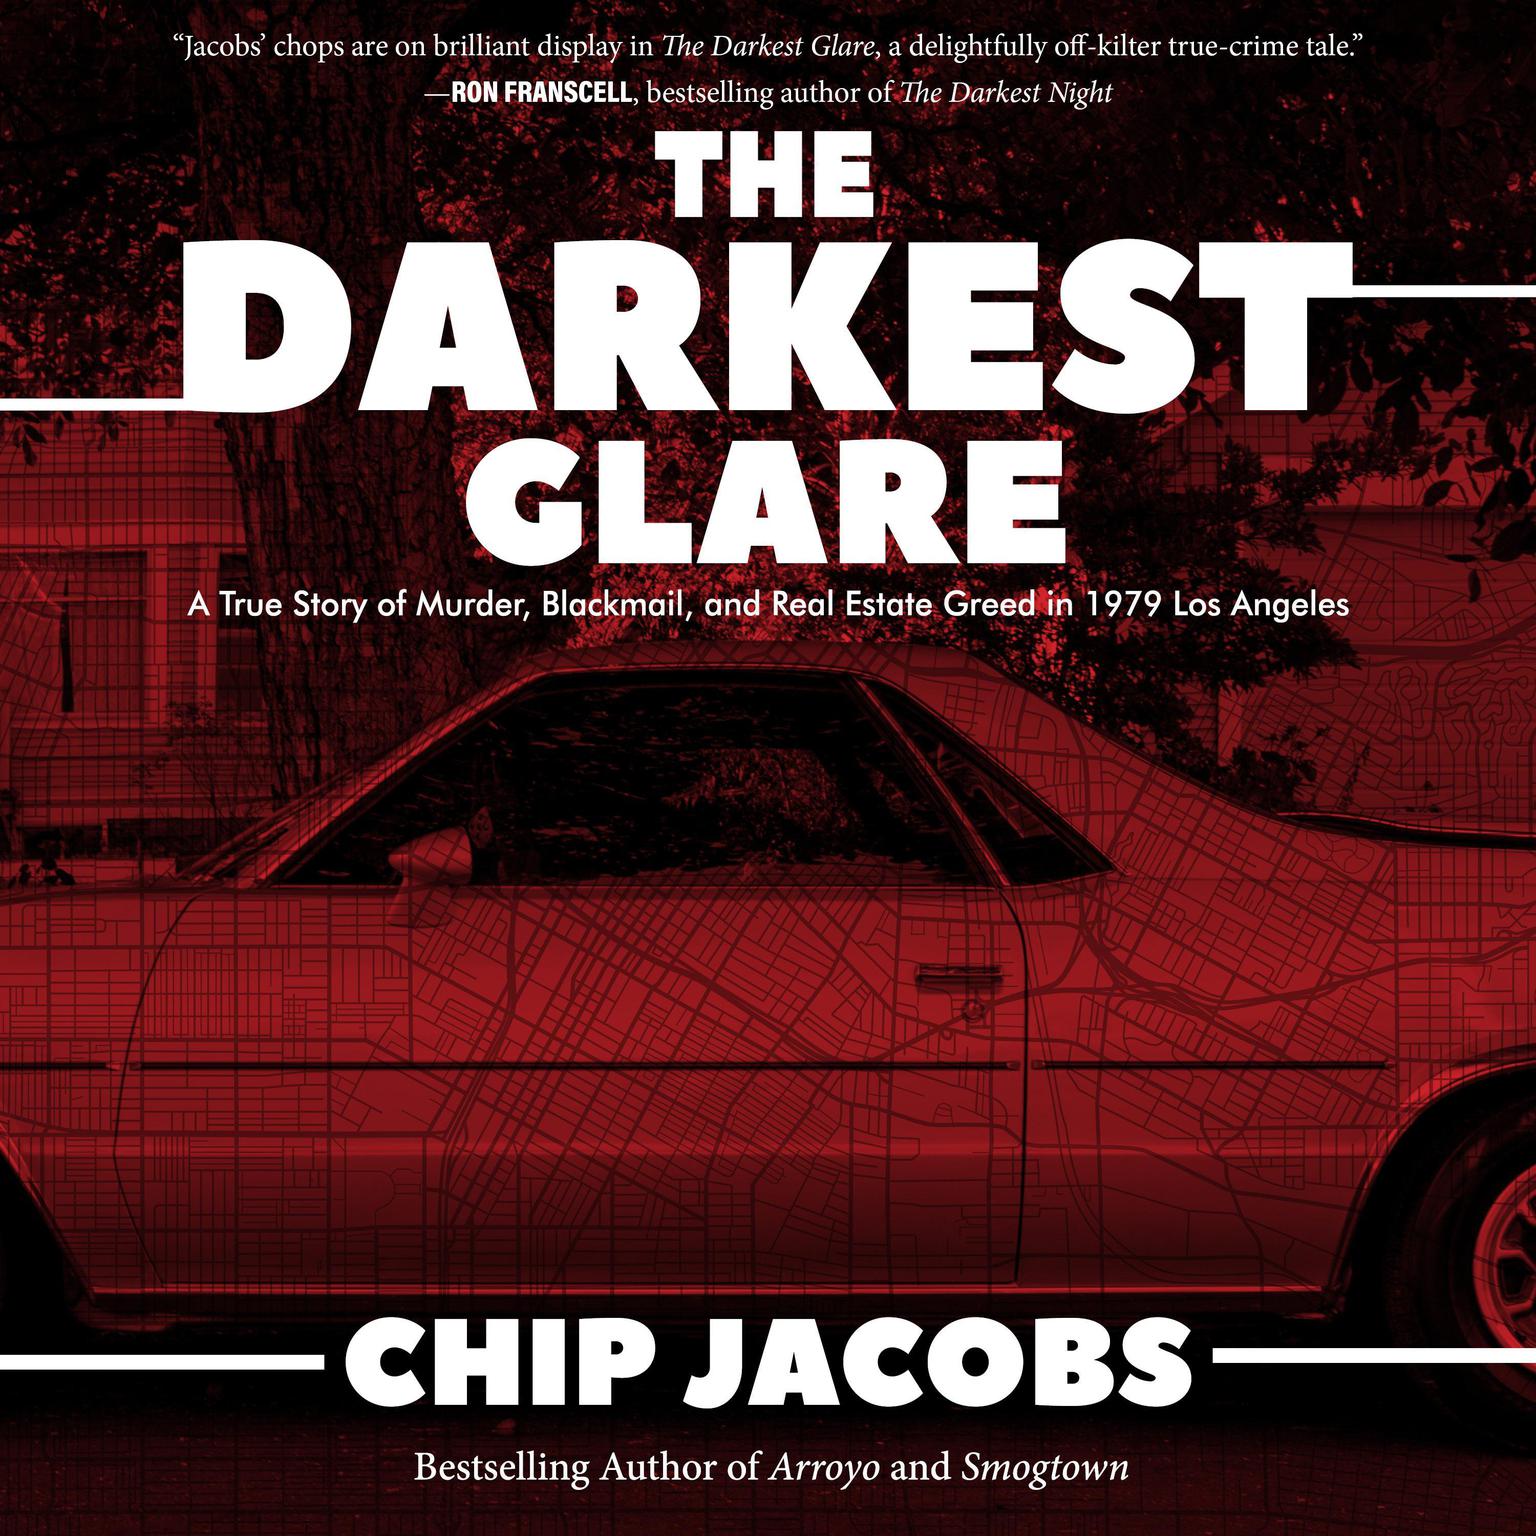 The Darkest Glare: A True Story of Murder, Blackmail, and Real Estate Greed in 1979 Los Angeles Audiobook, by Chip Jacobs